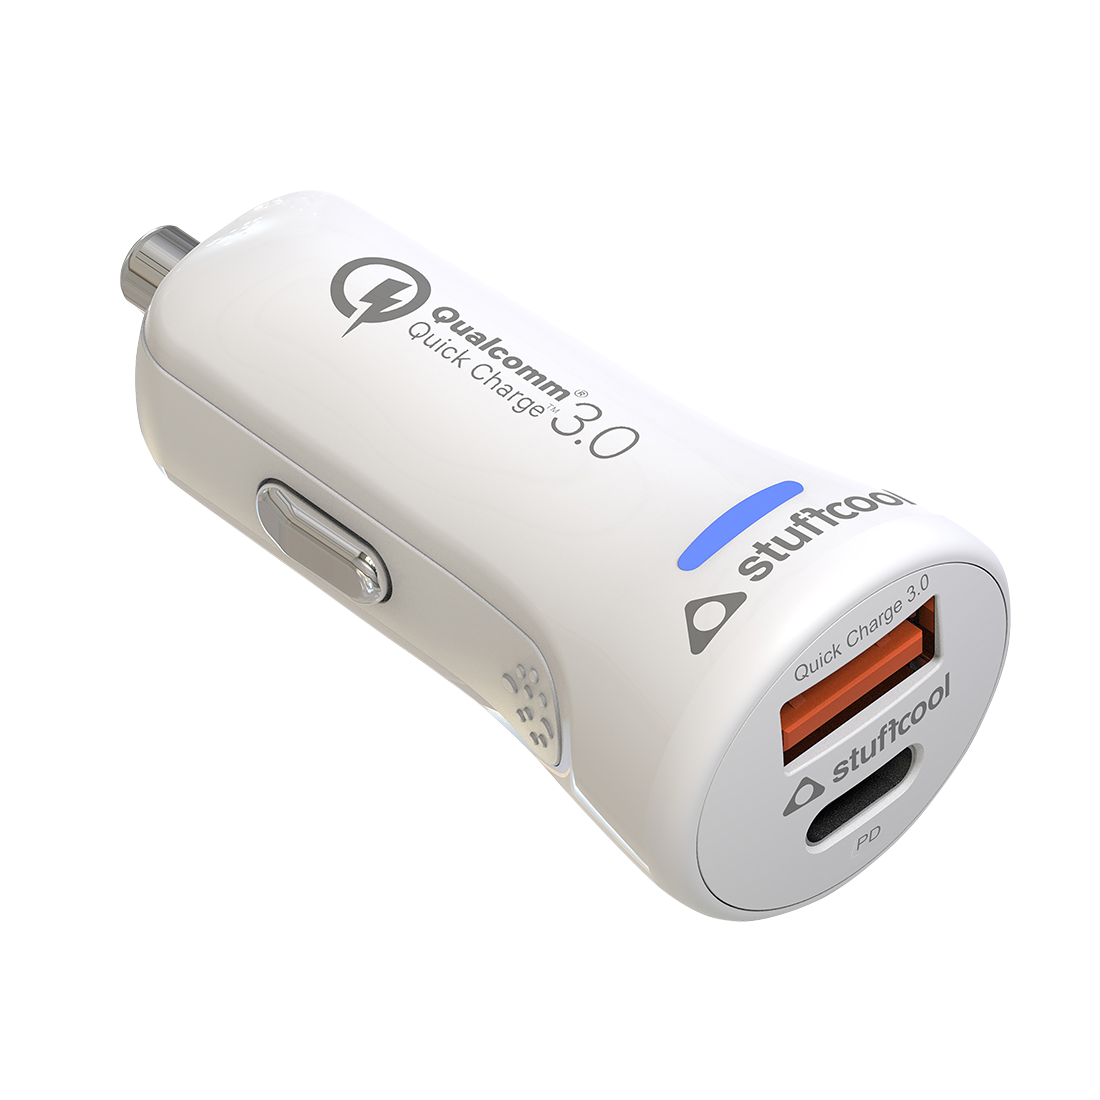 Atom Plus Type-C PD 20W & Quick Charge 3.0 Car Charger – Stuffcool